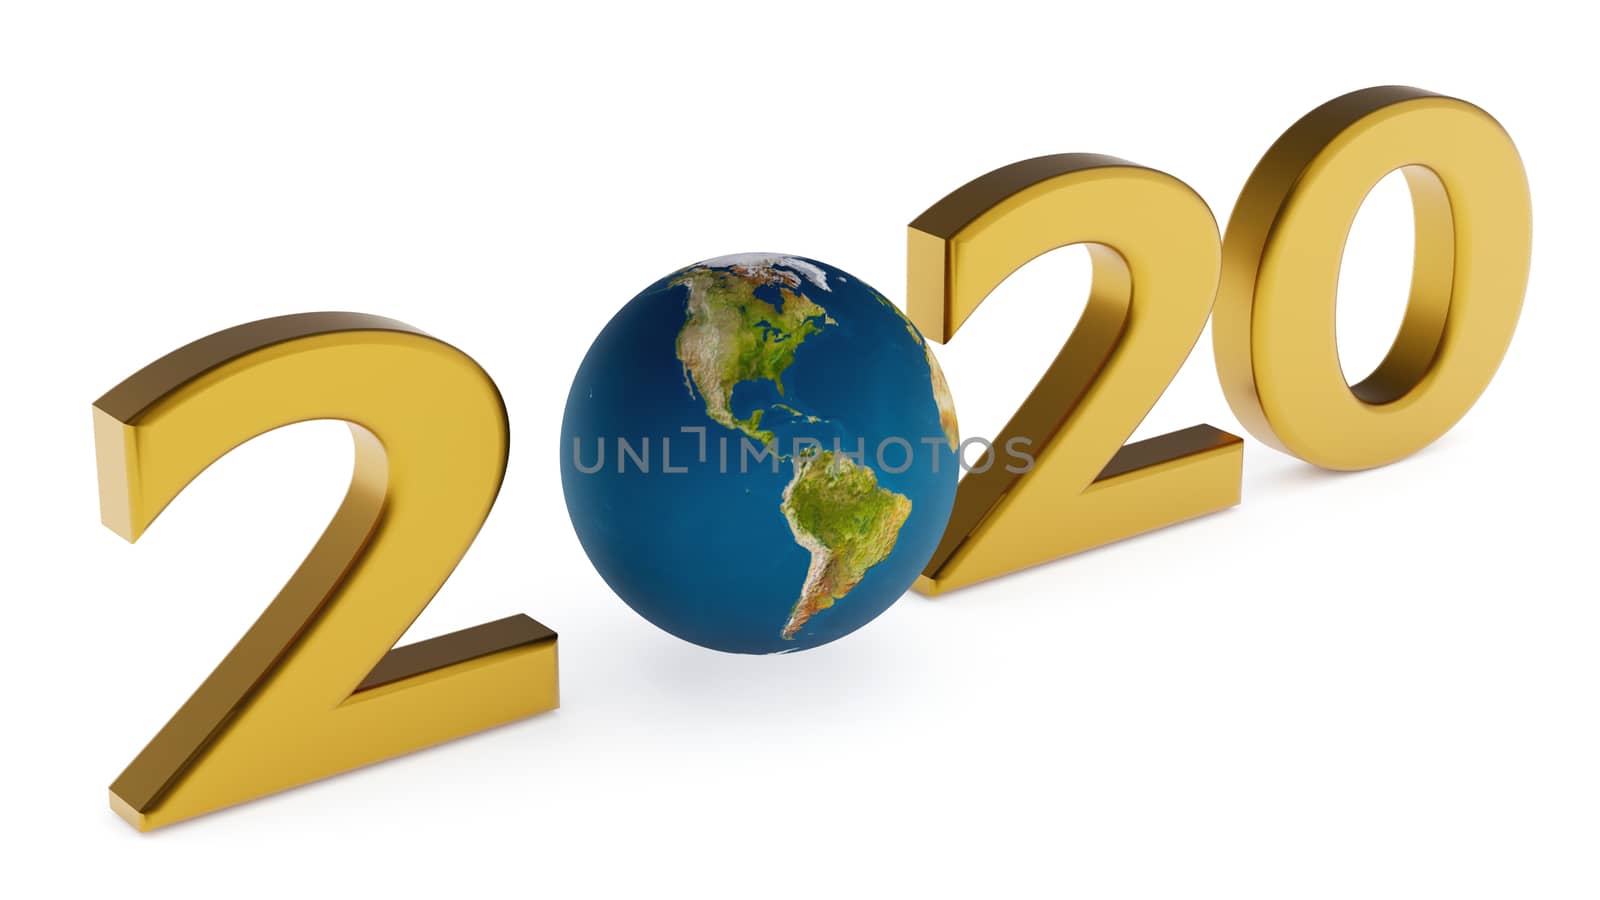 Yearr 2020 and globe america - new year concept 3d illustration over white